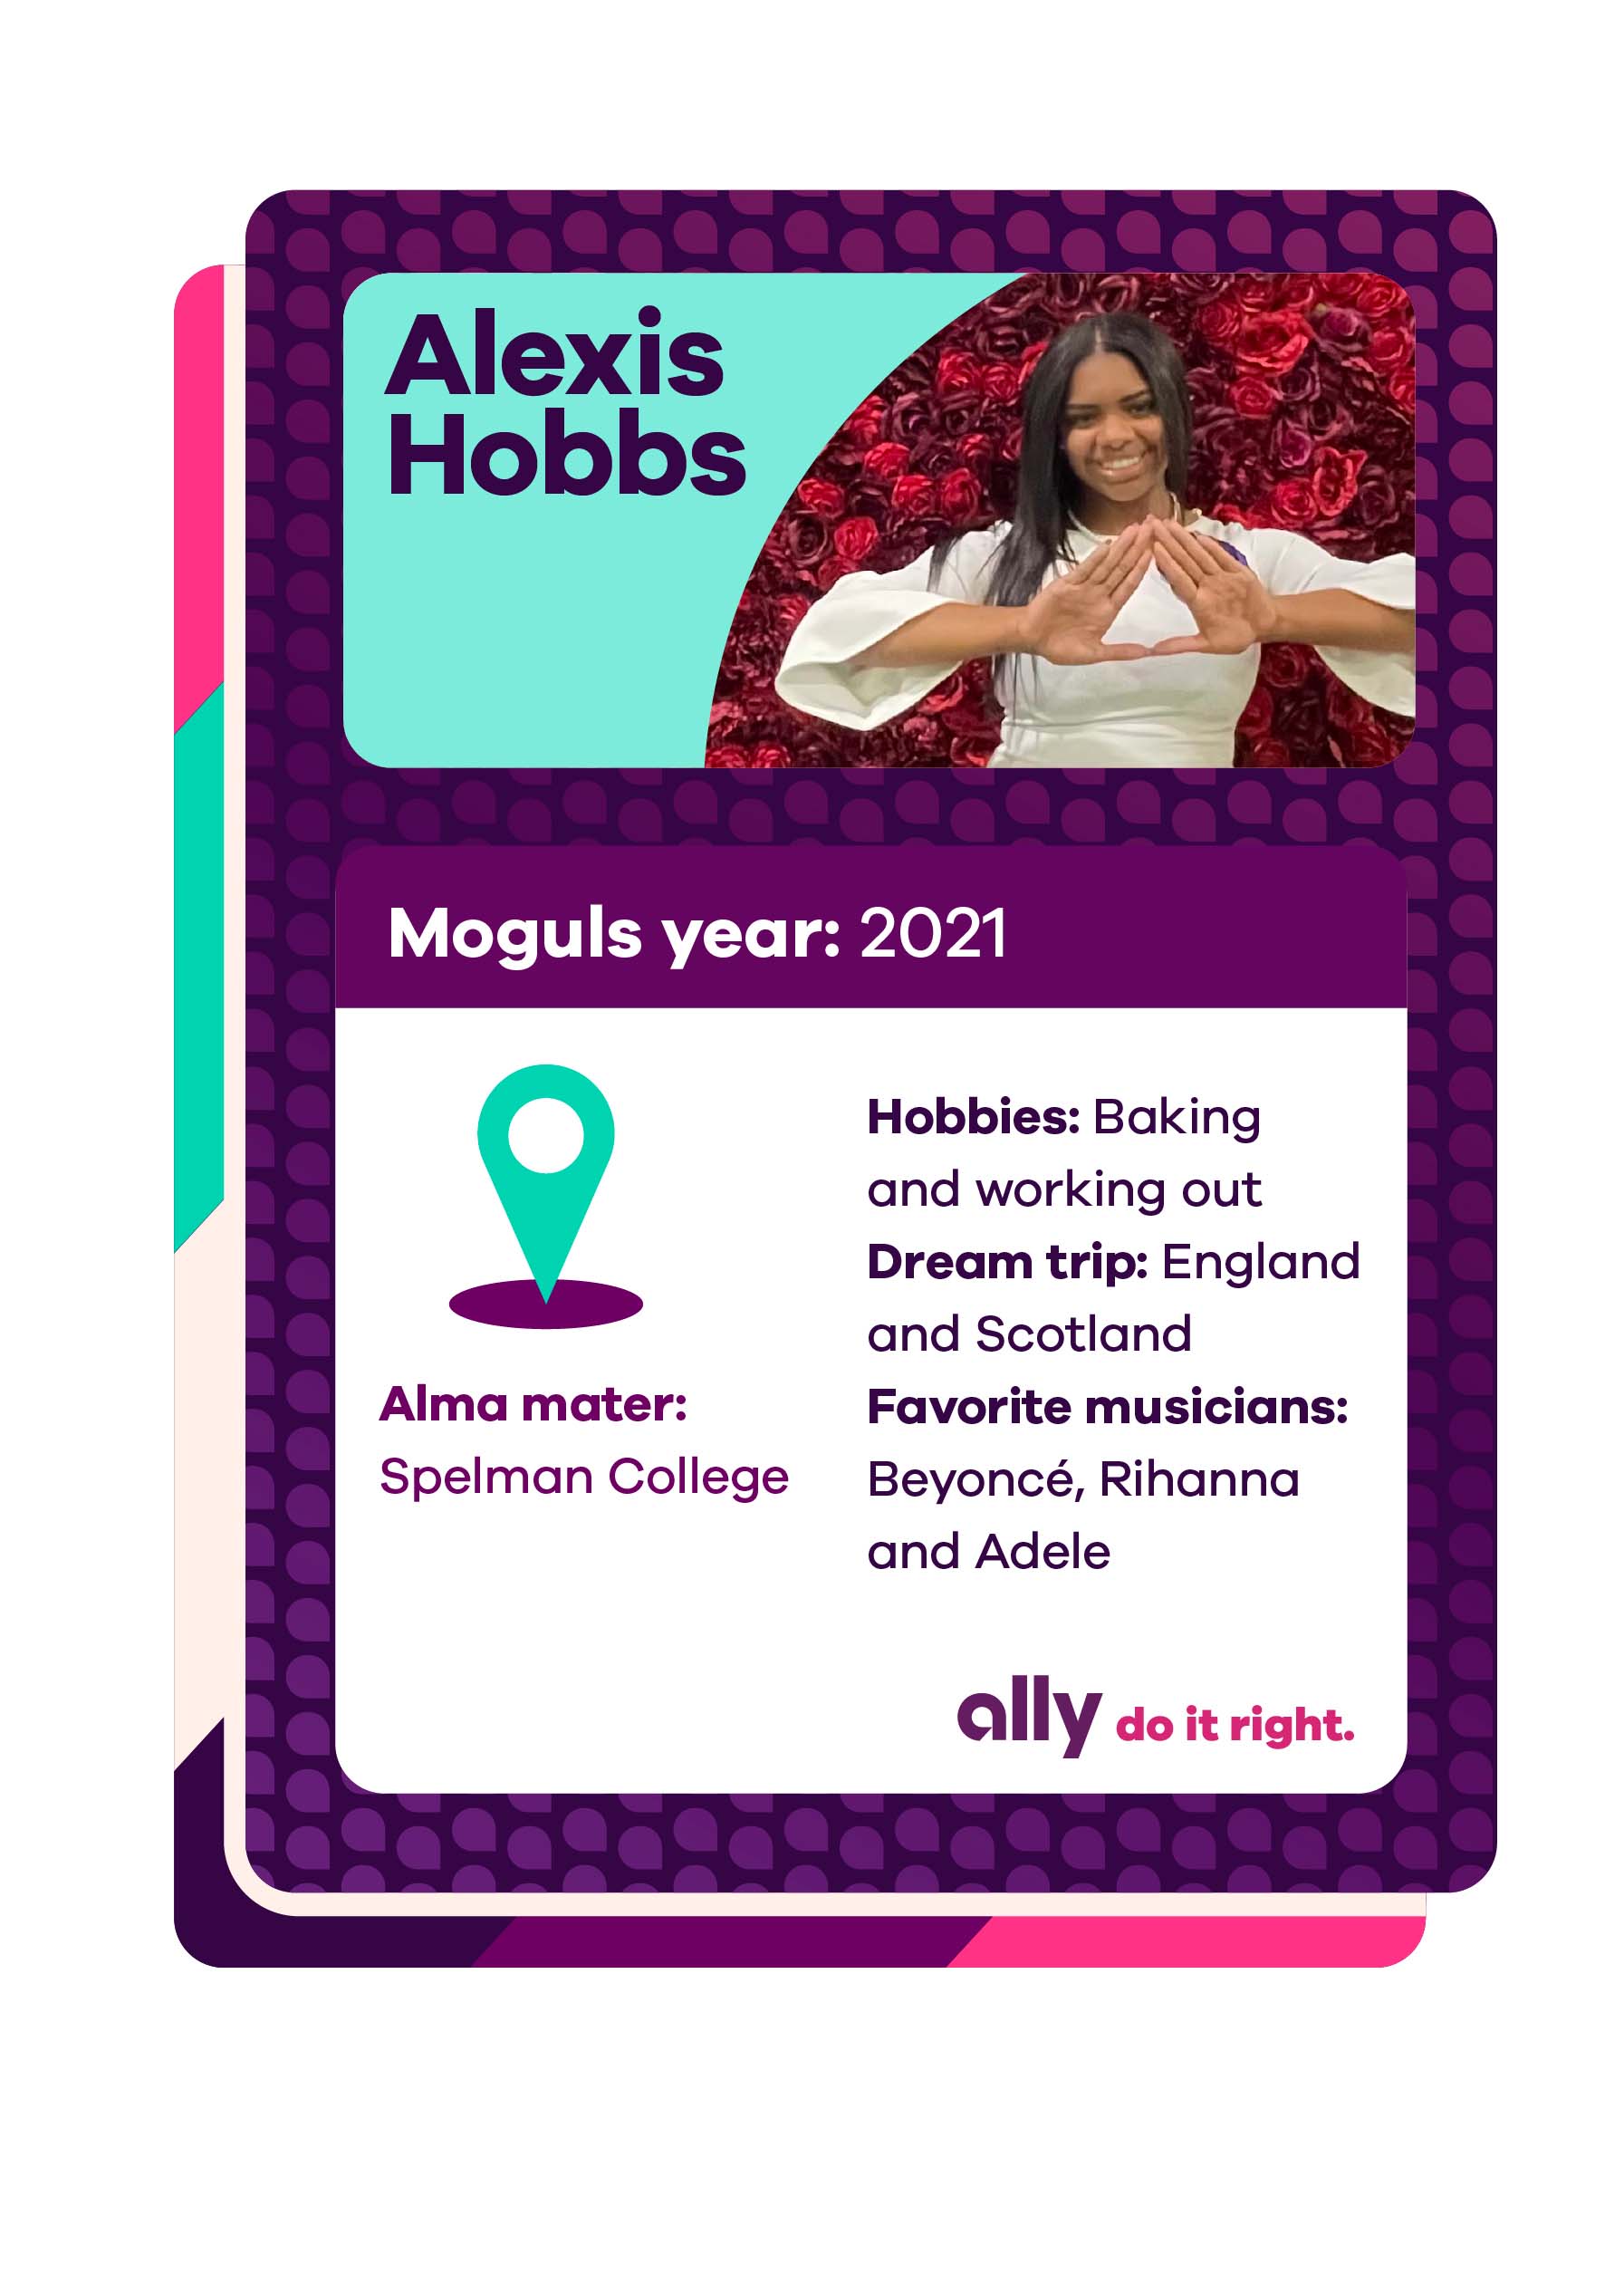  Infographic on Alexis Hobbs. Alma mater: Spelman College. Hobbies: Baking and working out. Dream trip: England and Scotland. Favorite musicians: Beyonce, Rihanna and Adele.]